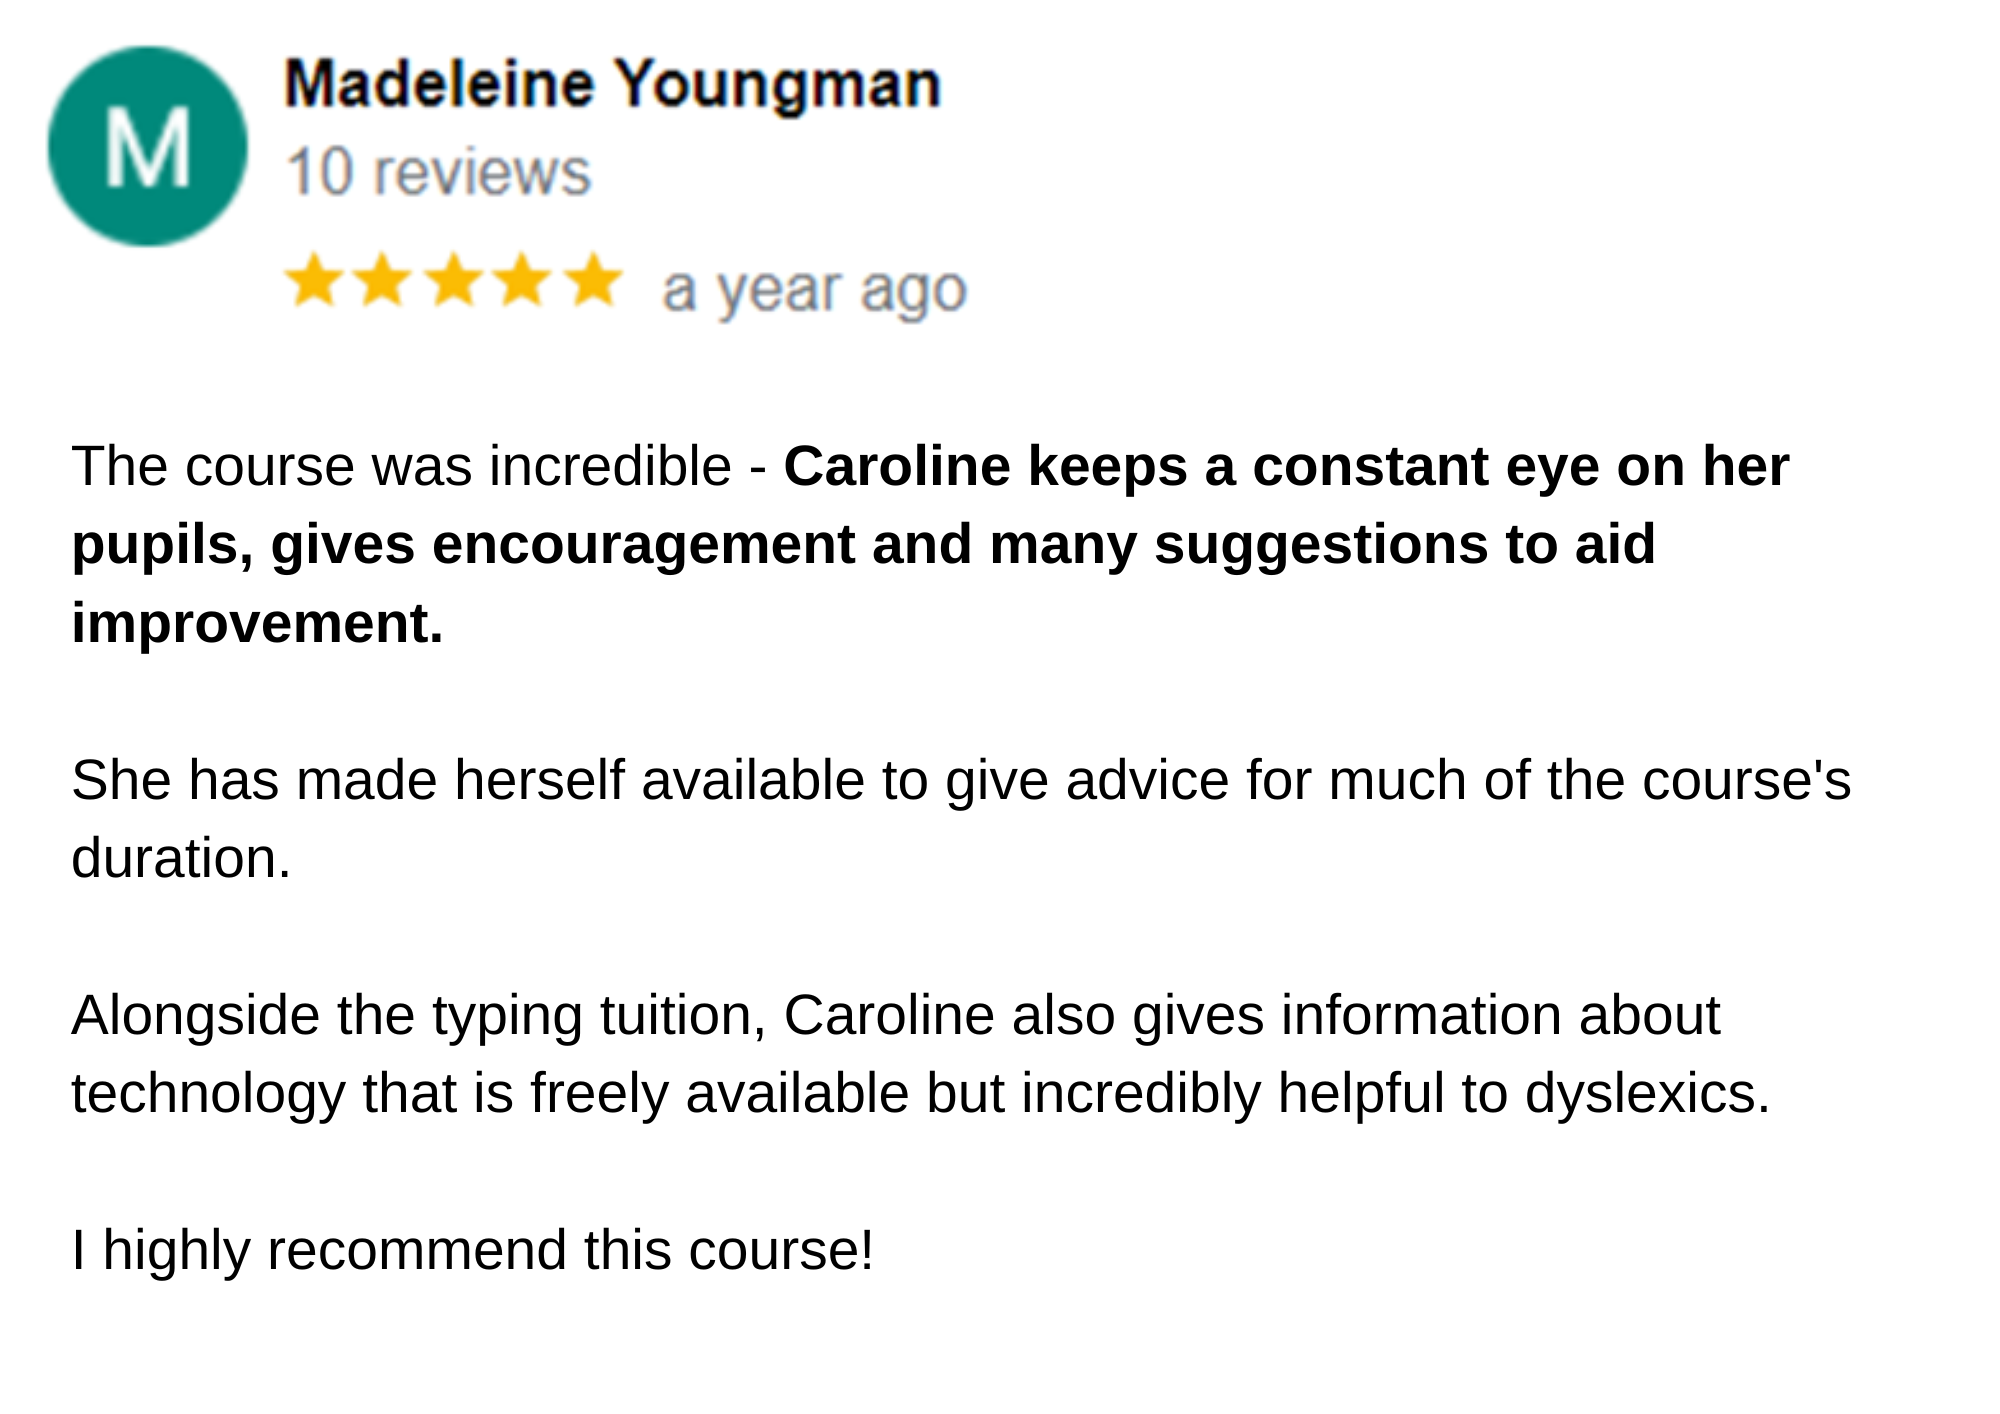 Madeleine Youngman Google Review.png